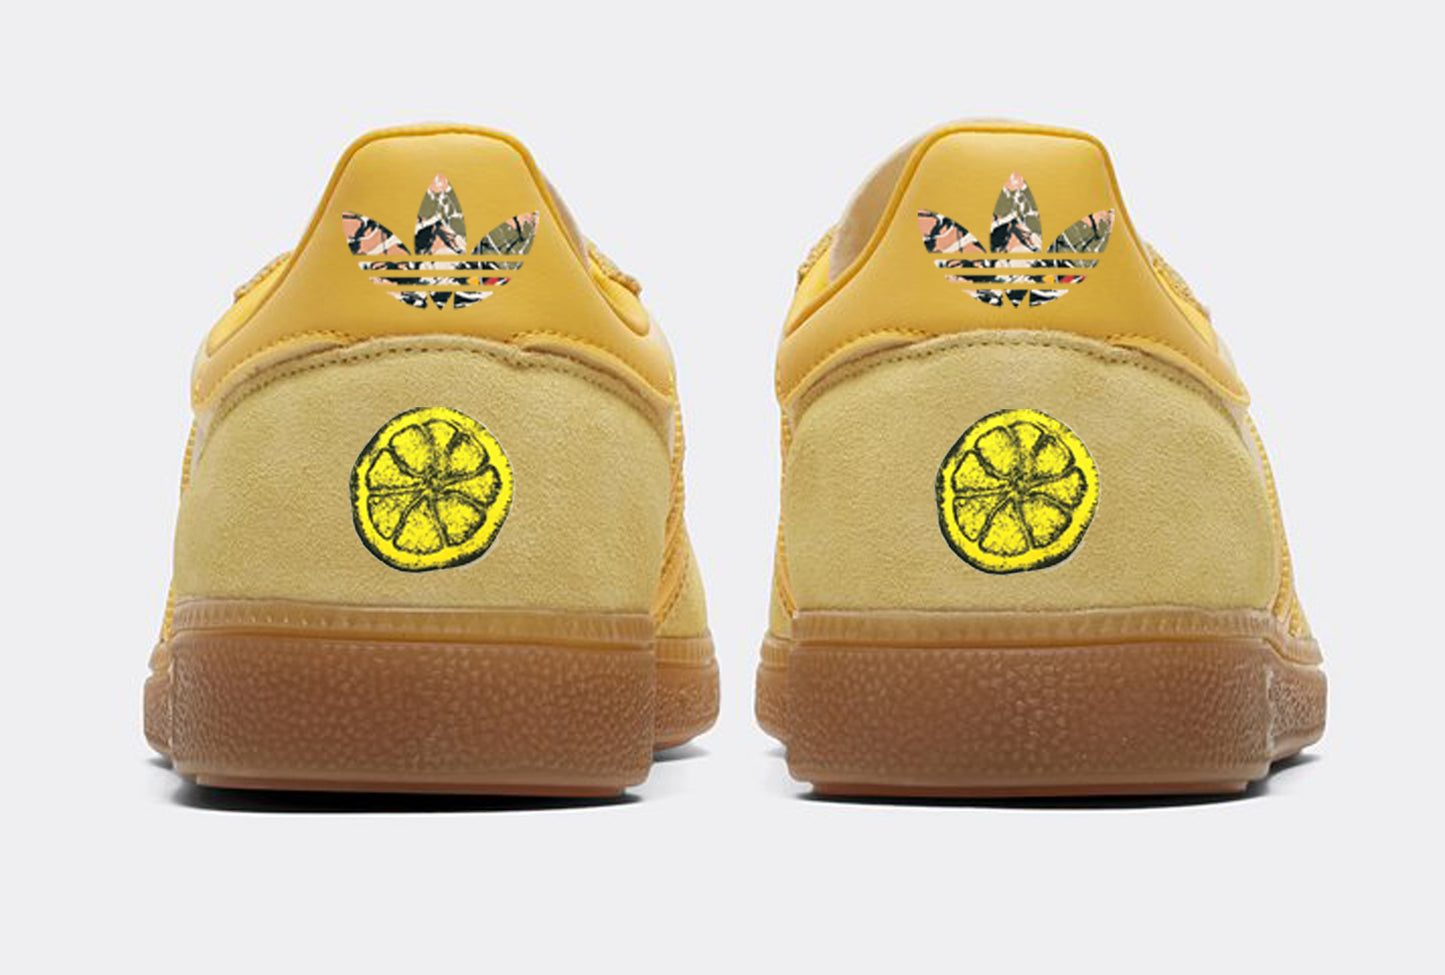 Limited edition The Stone Roses She bangs the drums custom adidas original yellow Handball Spezial trainers / sneakers.